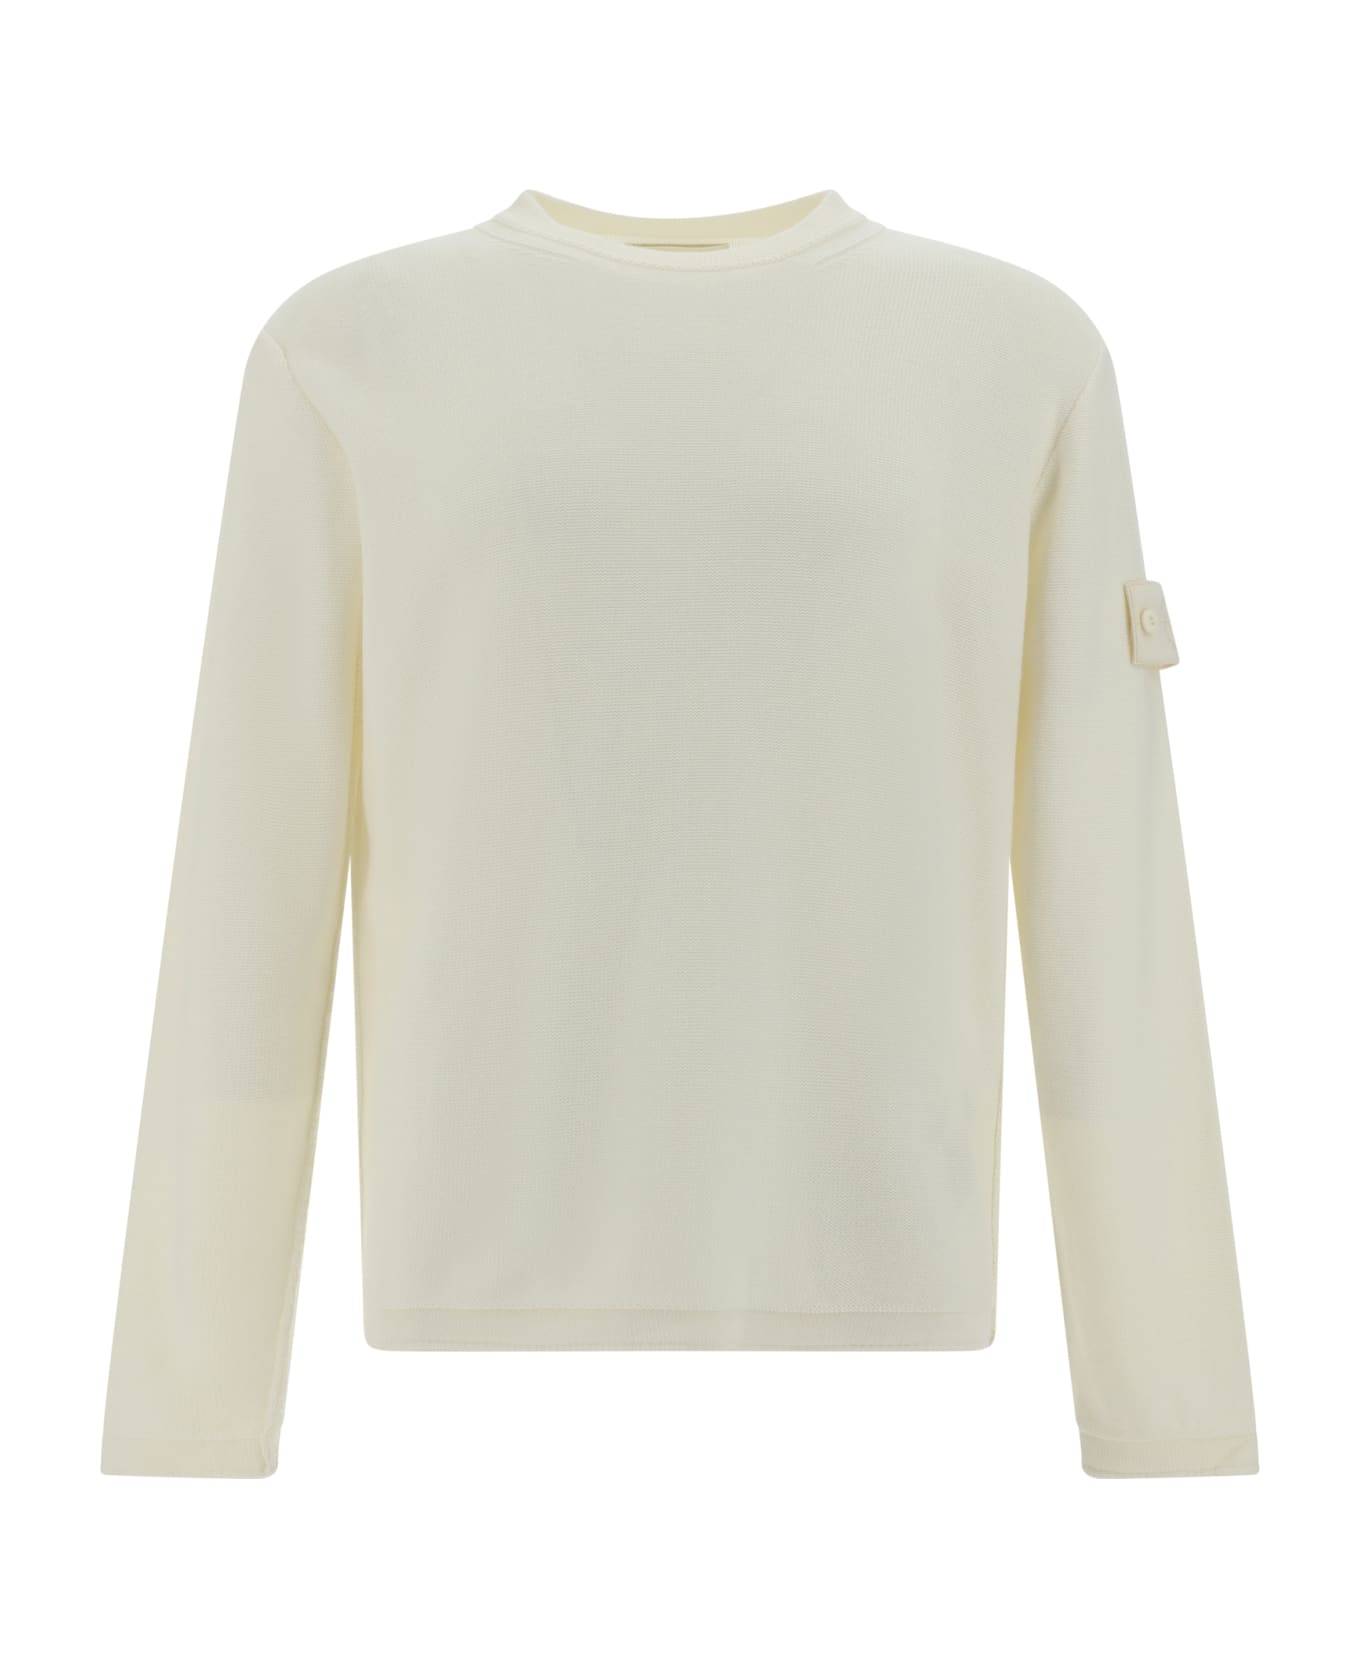 Stone Island Ghost Sweater - Bco Naturale ニットウェア